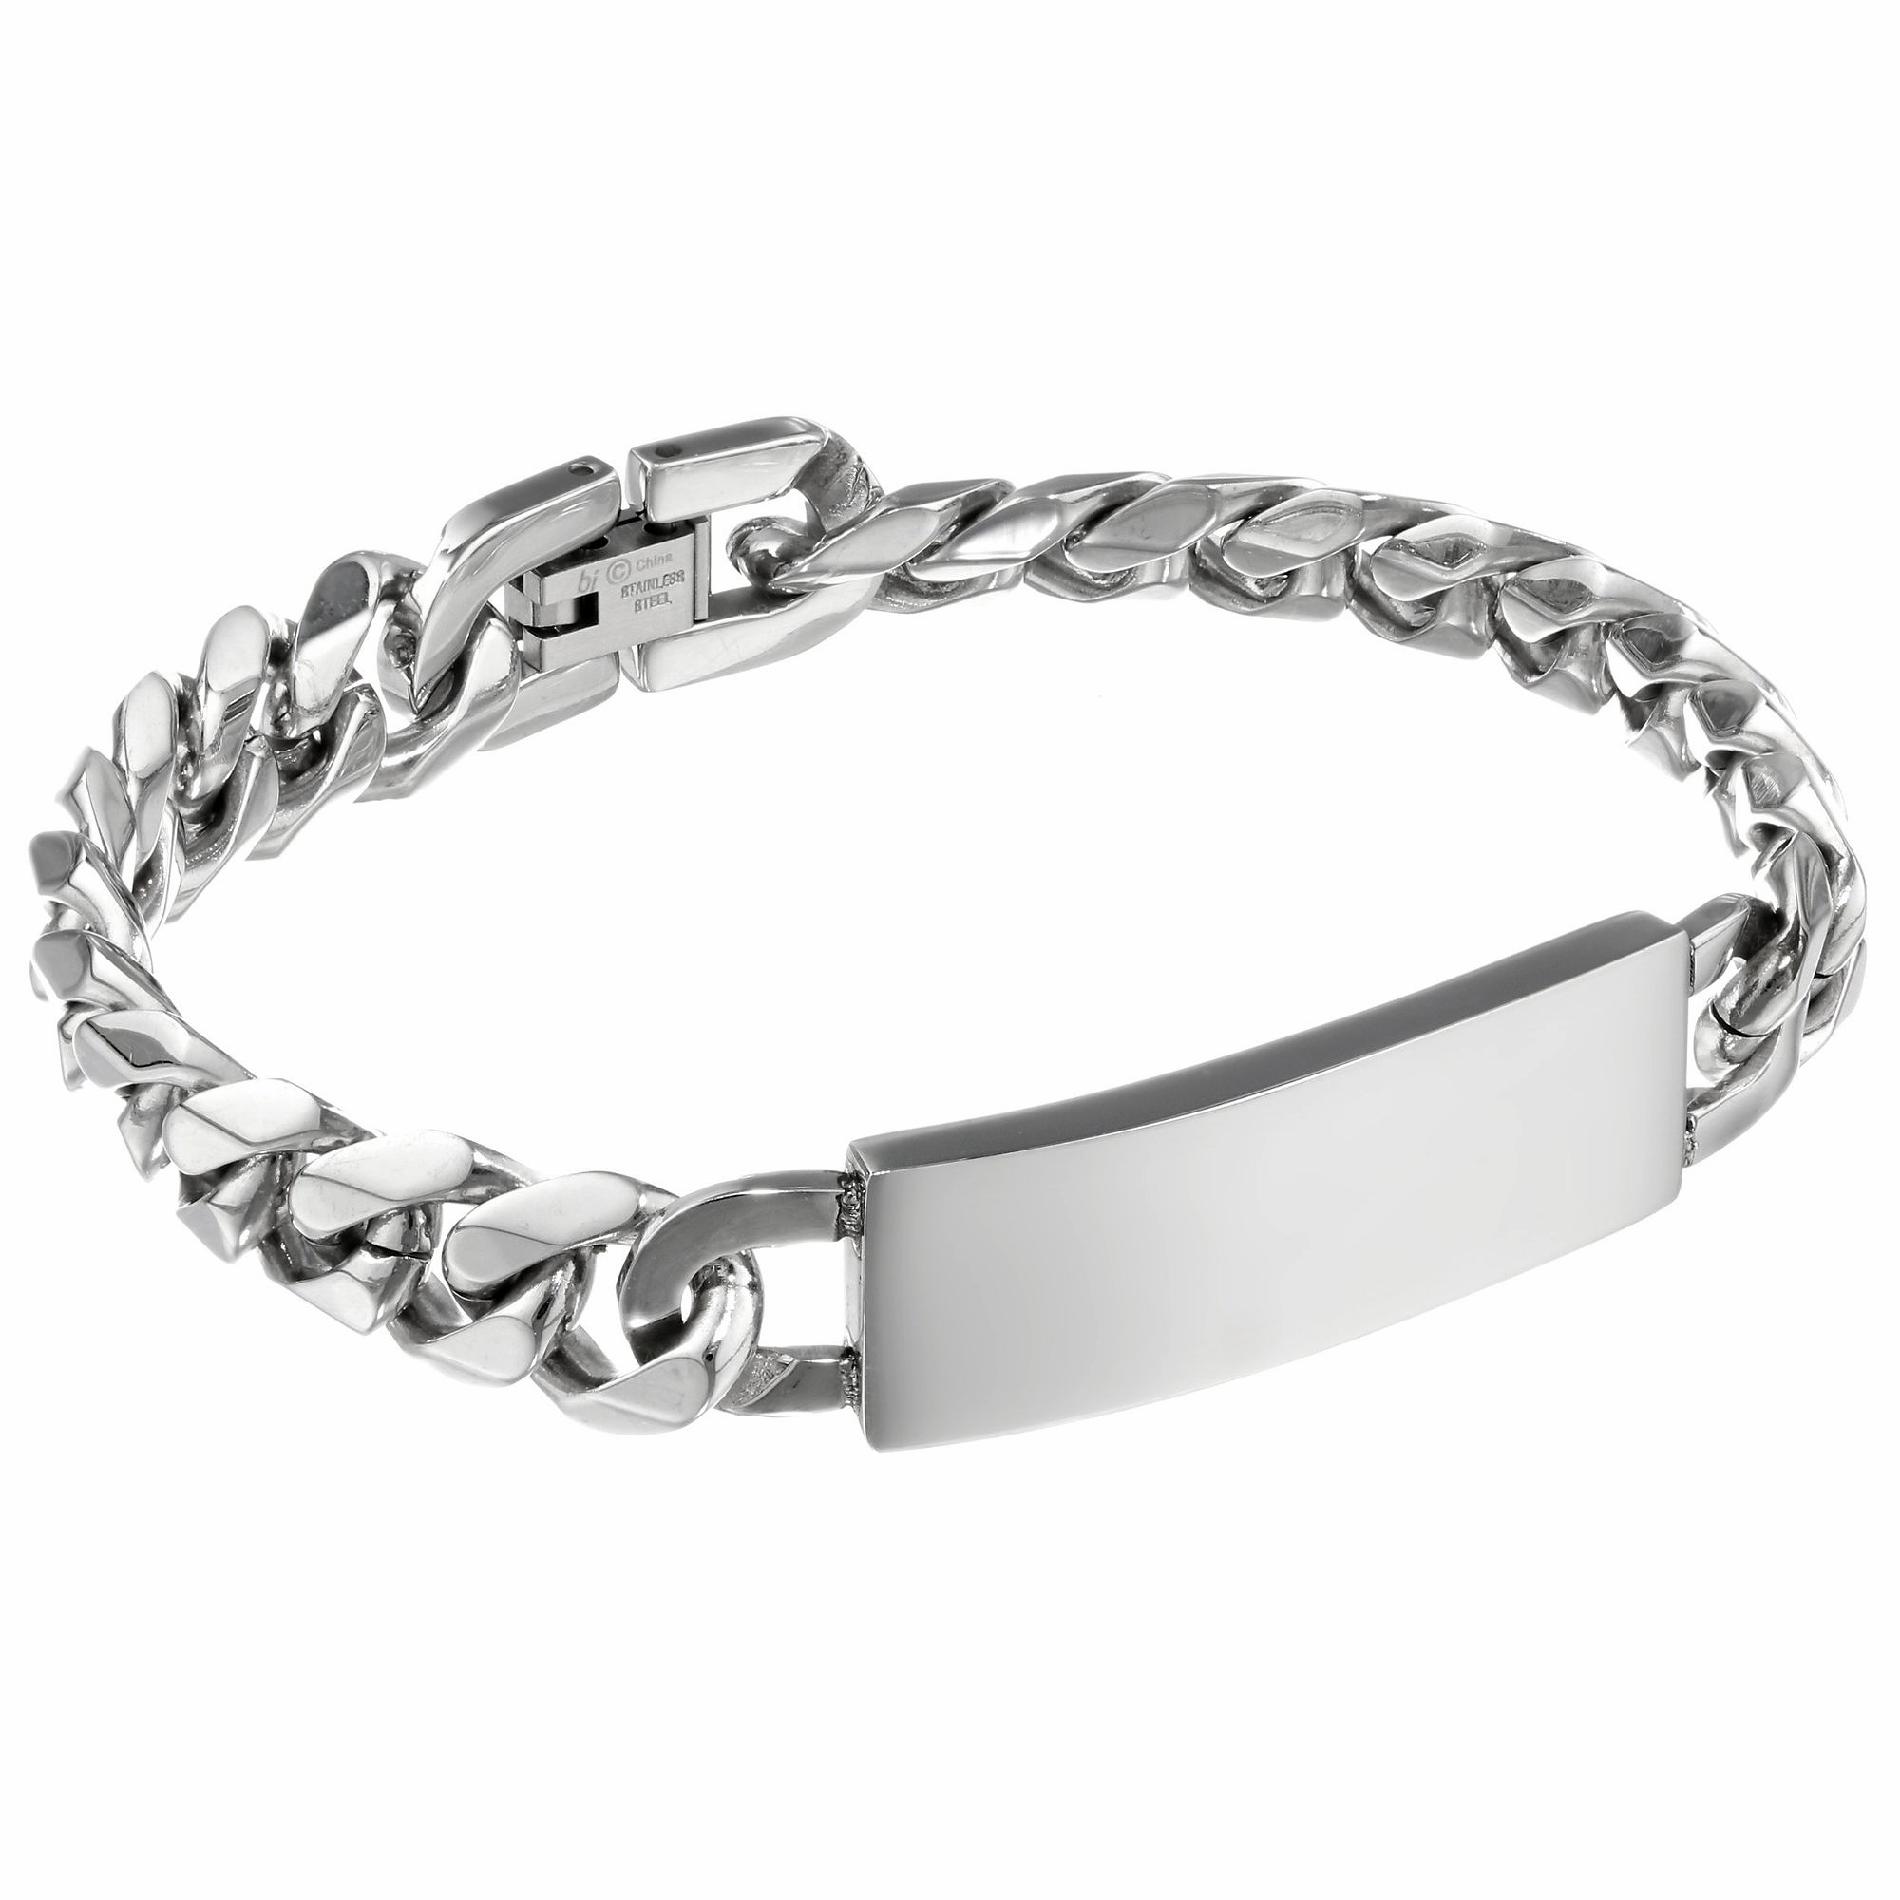 Beveled Identification Bracelet Ion Plated Stainless Steel -12mm